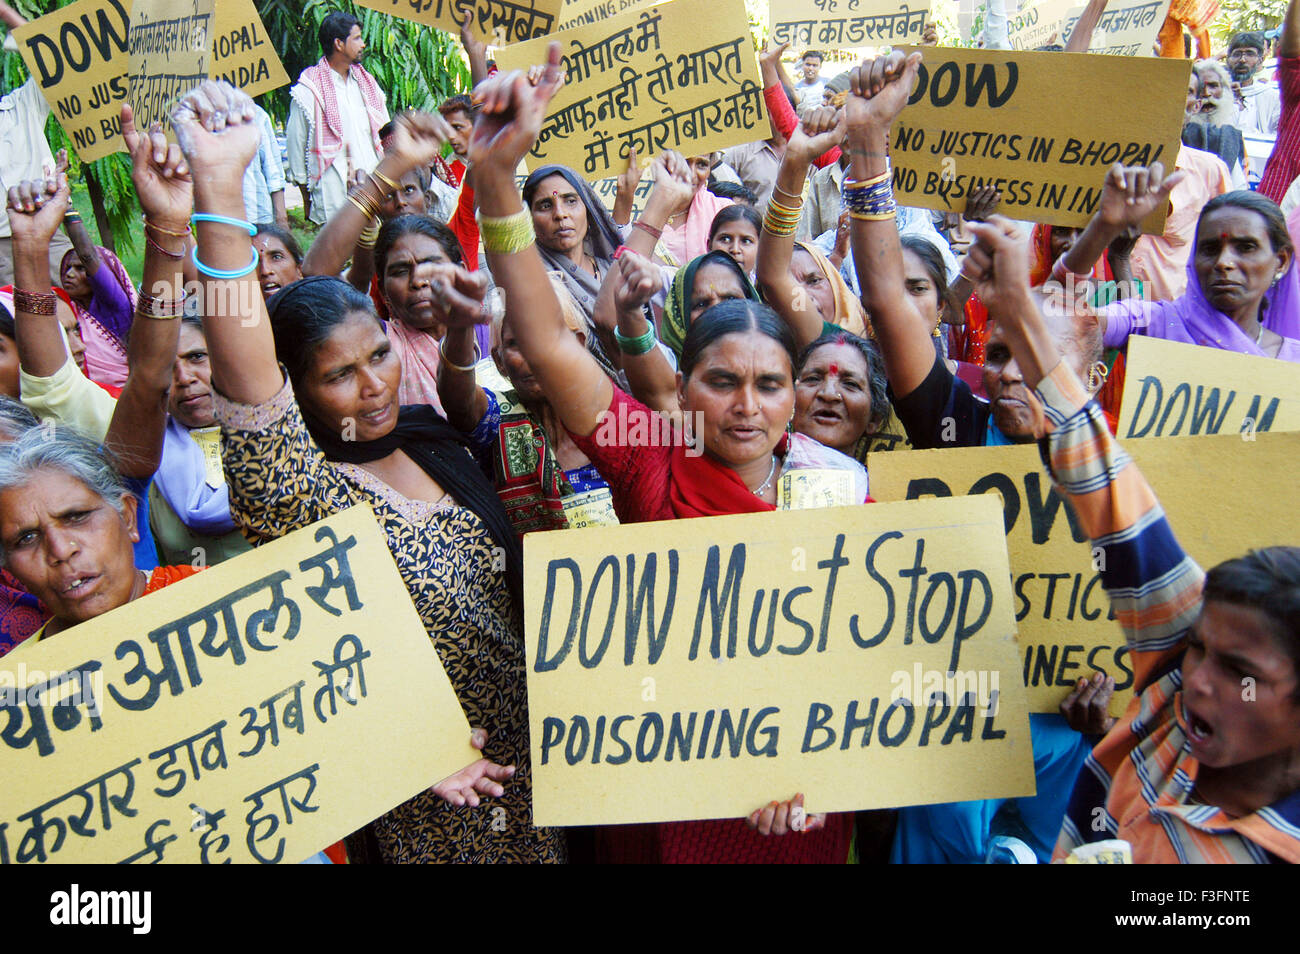 Survivors and relatives of Bhopal Gas Tragedy women protesting shouting slogans in front of Dow Chemical Company in Bombay Mumbai Maharashtra India Stock Photo